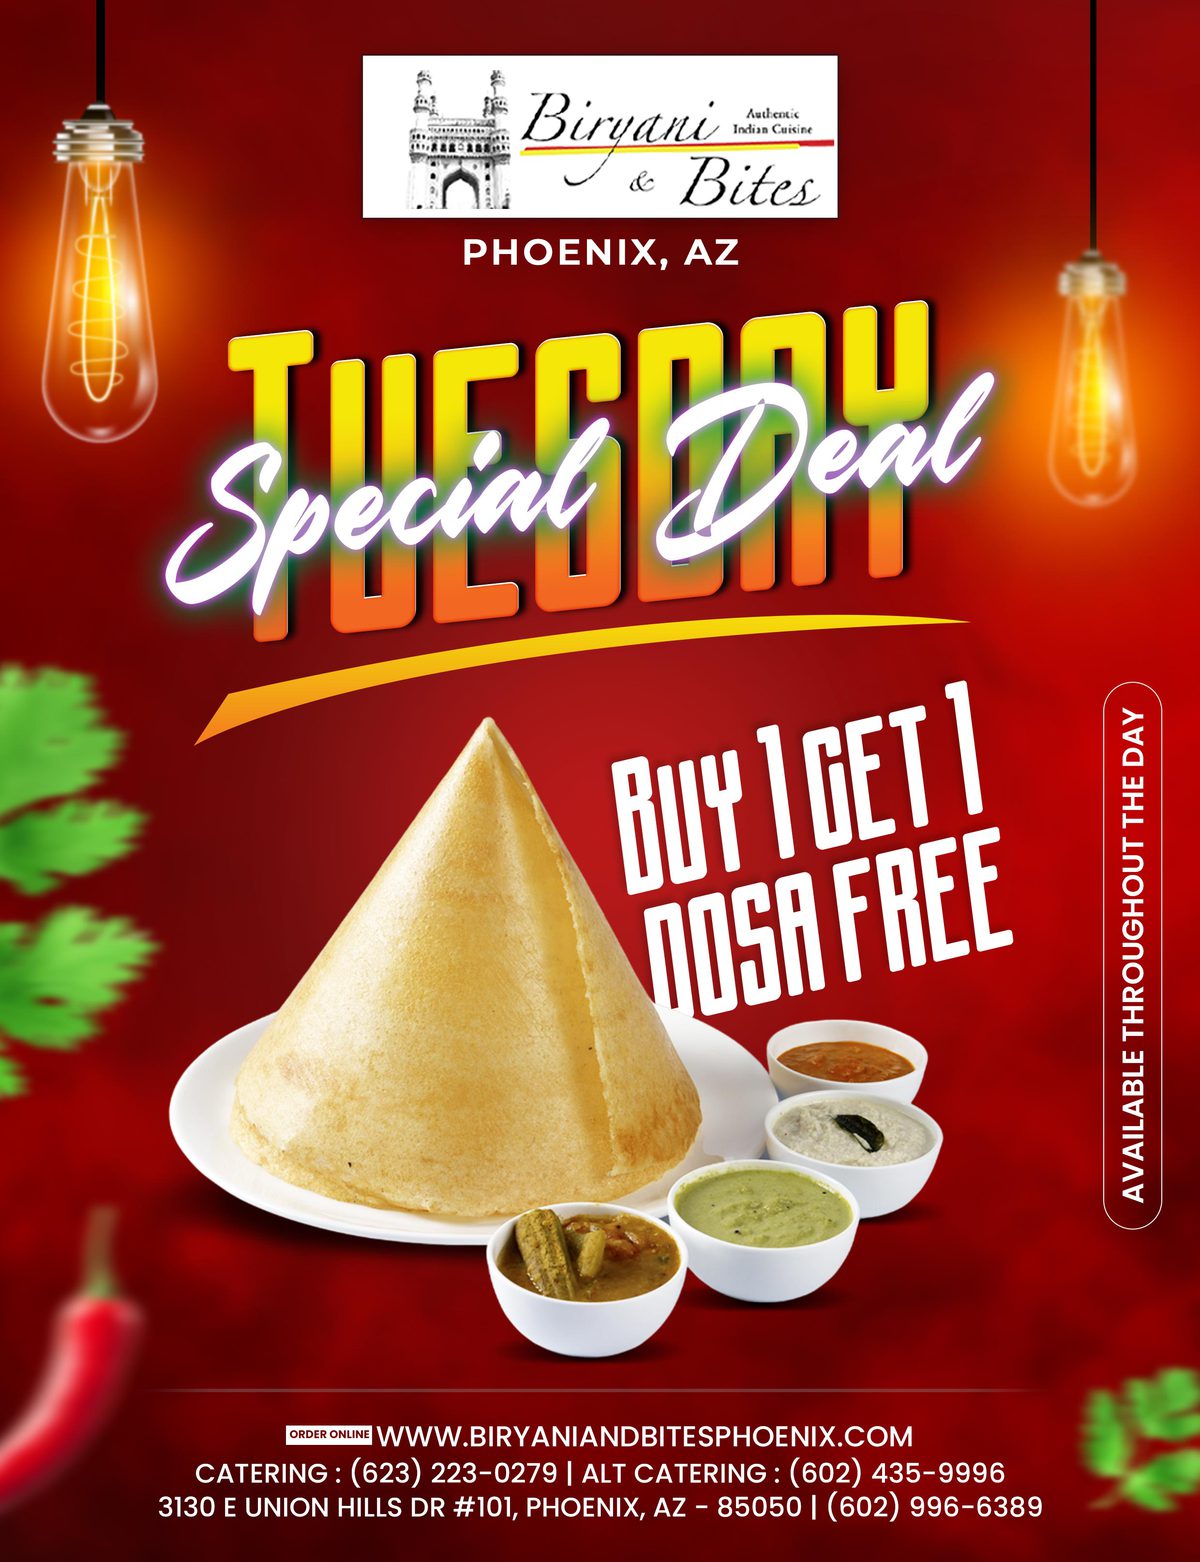 Tuesday BOGO Special (Buy one Get one Dosa Free)